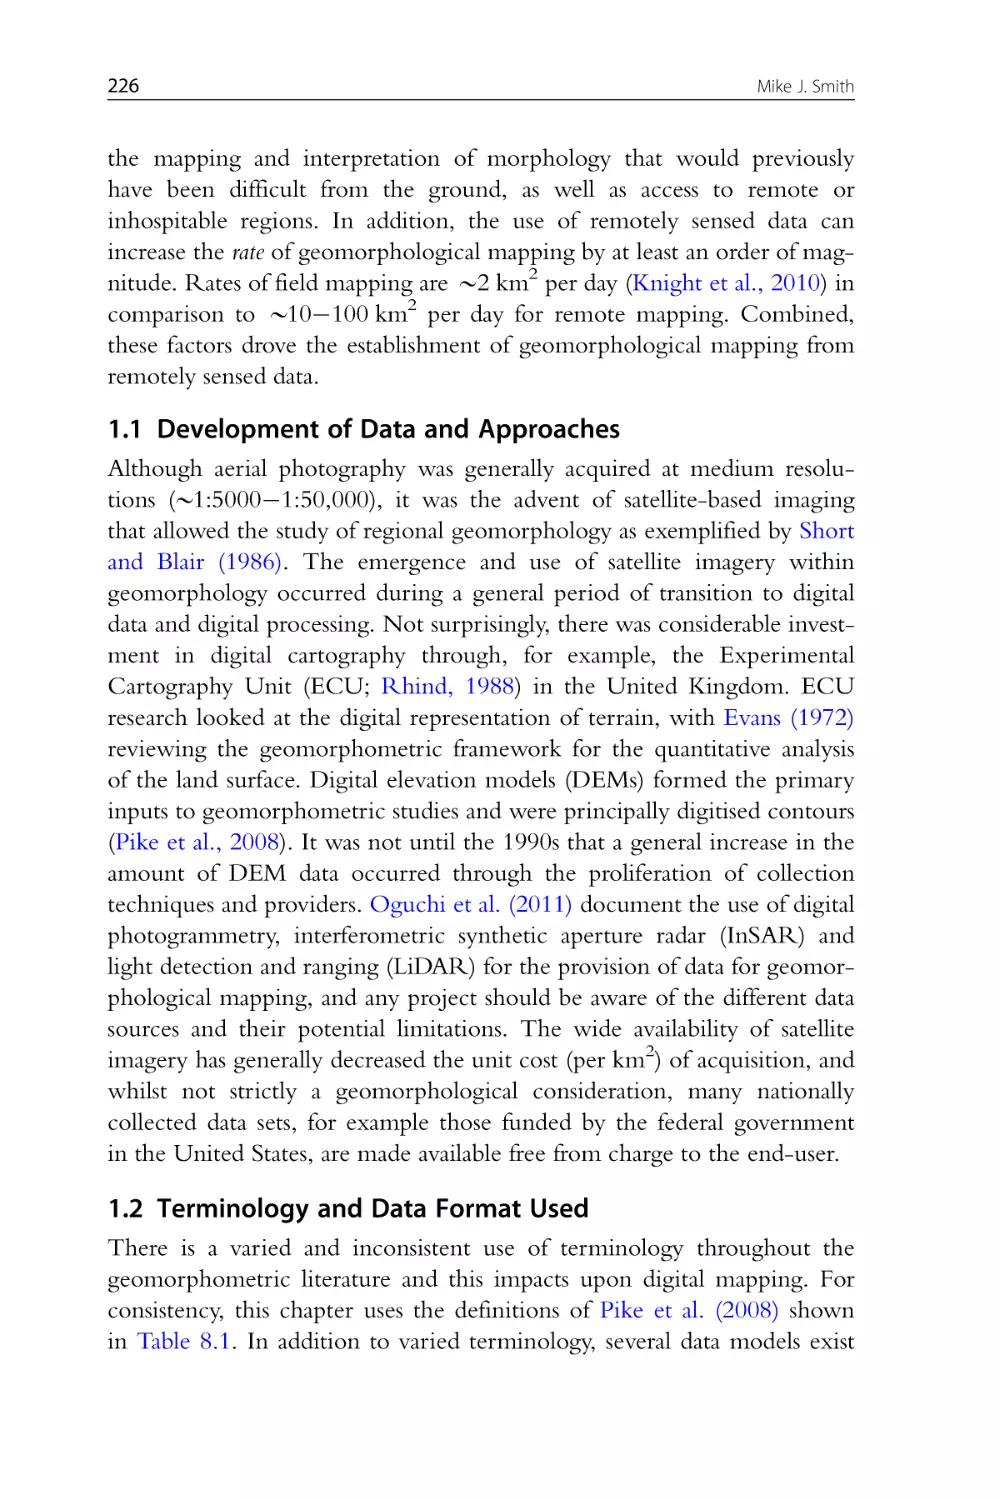 1.1 Development of Data and Approaches
1.2 Terminology and Data Format Used